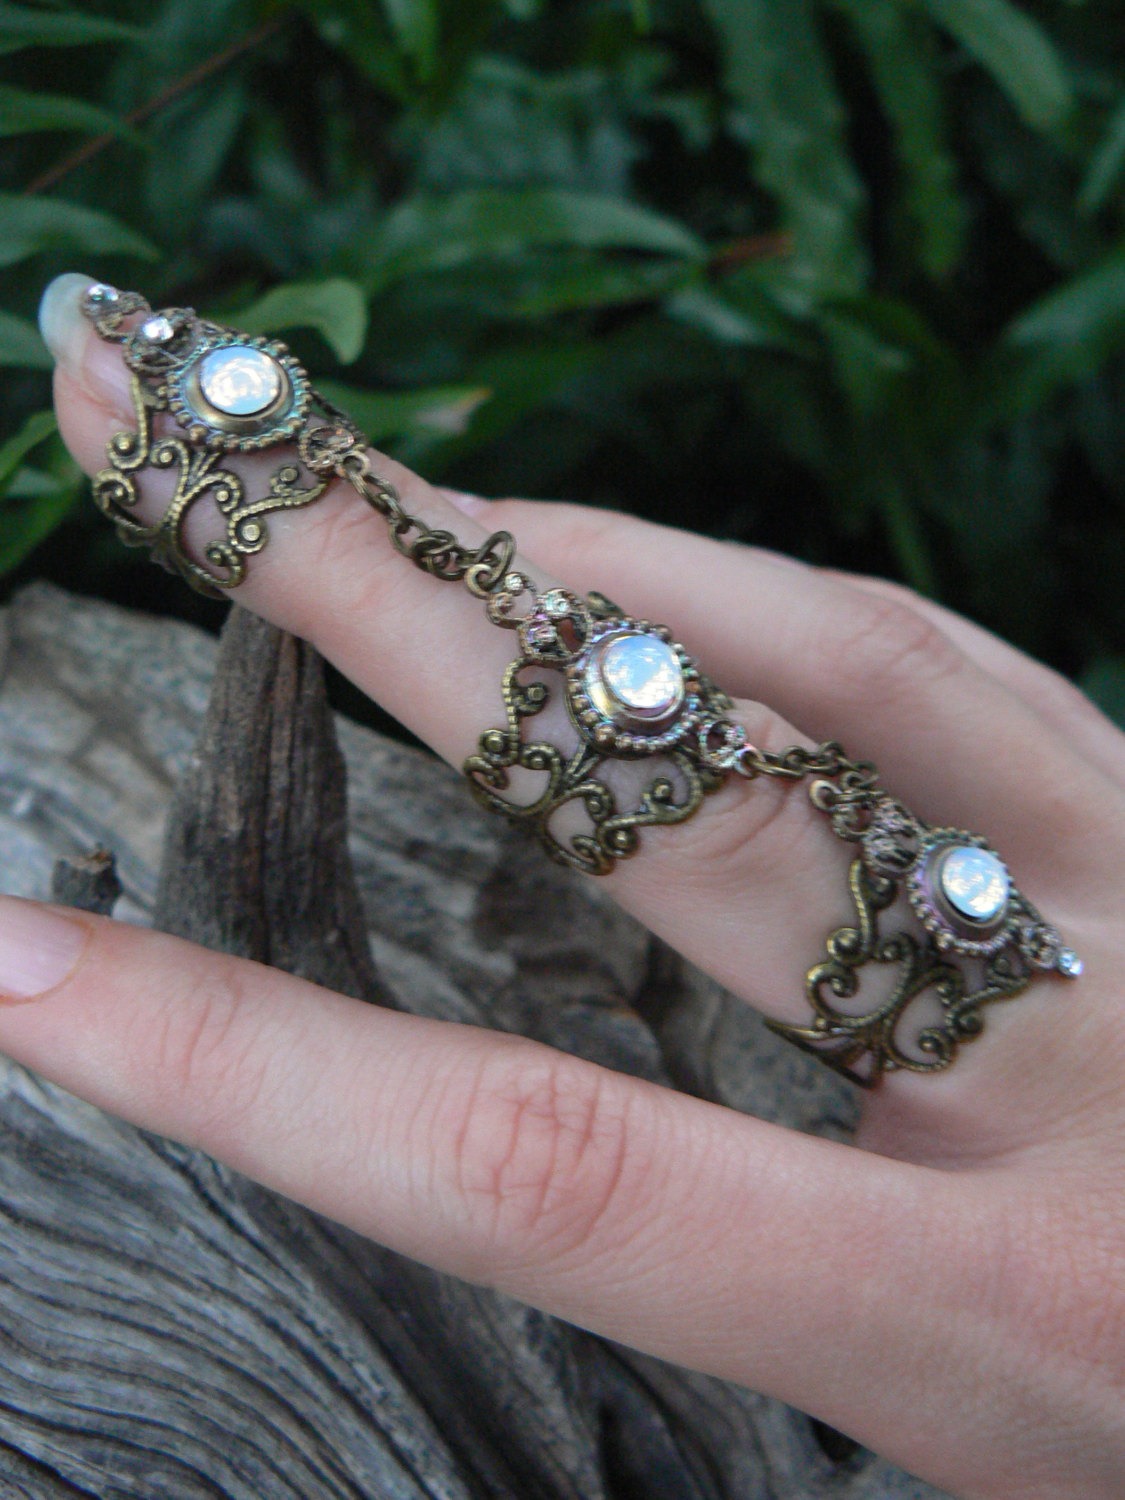 triple armor ring nail ring opal glass claw ring knuckle ring statement ring victorian steampunk moon goddess pagan witch boho gypsy style steampunk buy now online